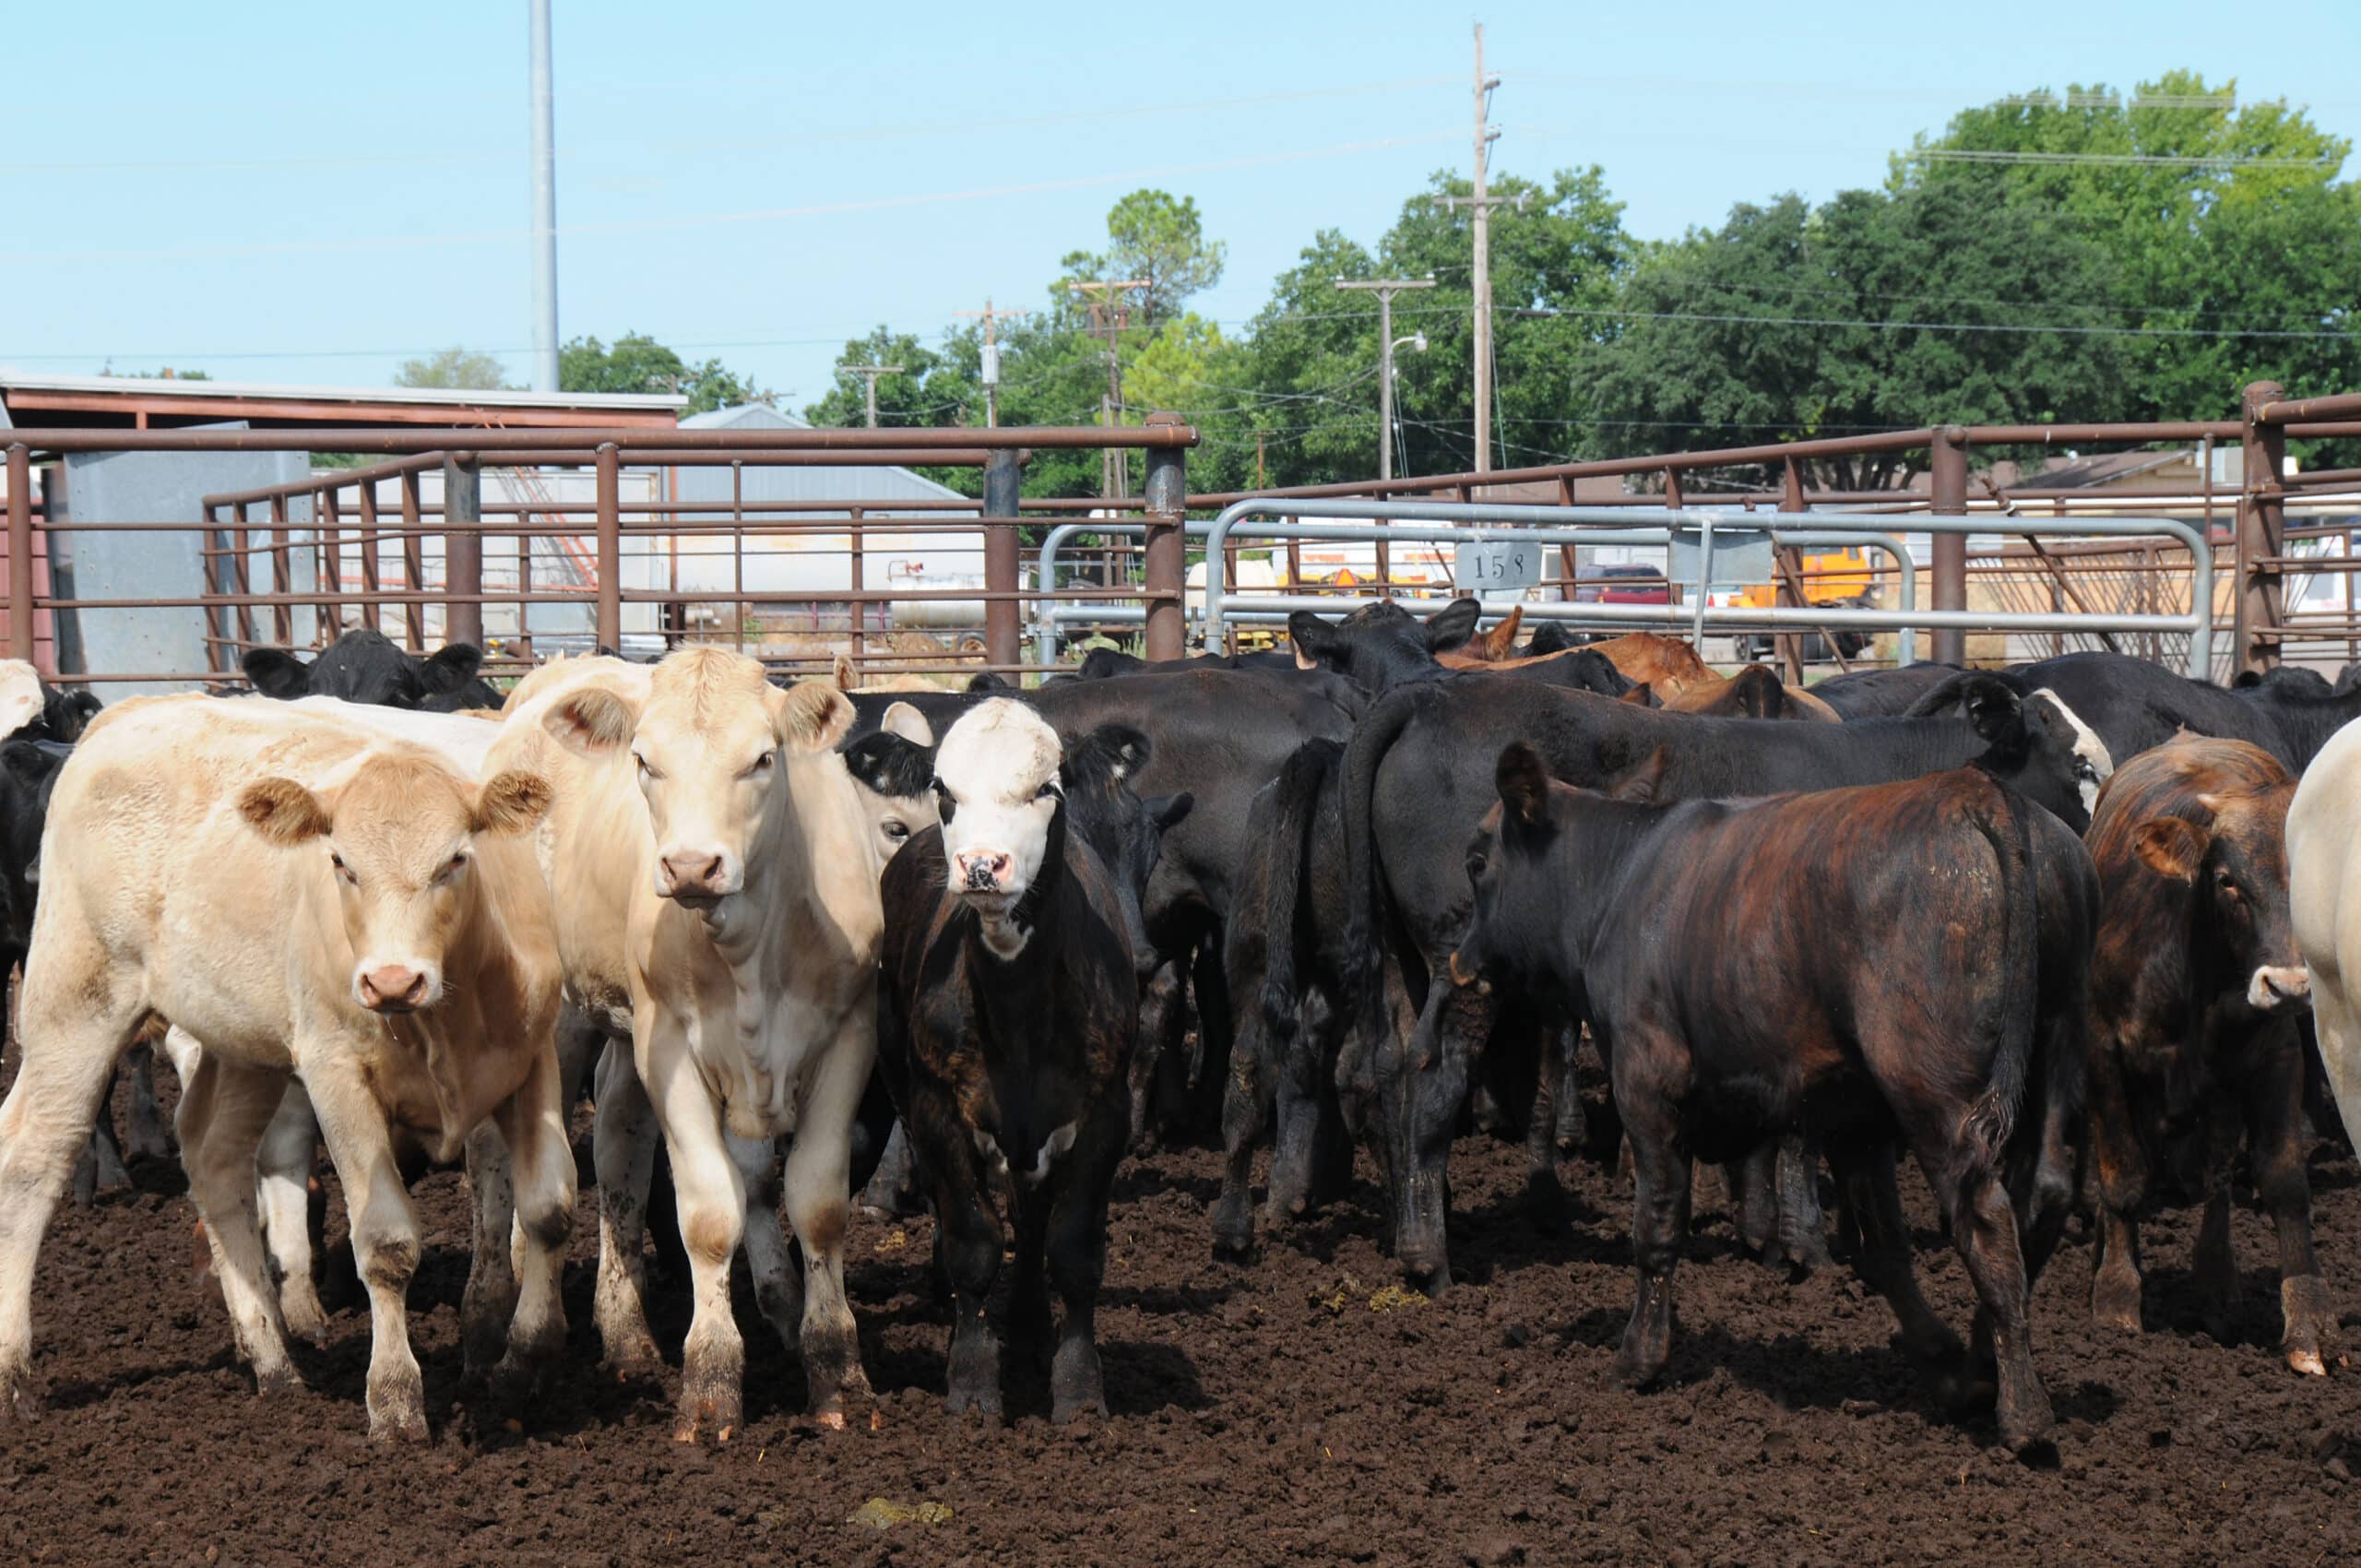 a herd of cows stand outdoors in a feedlot